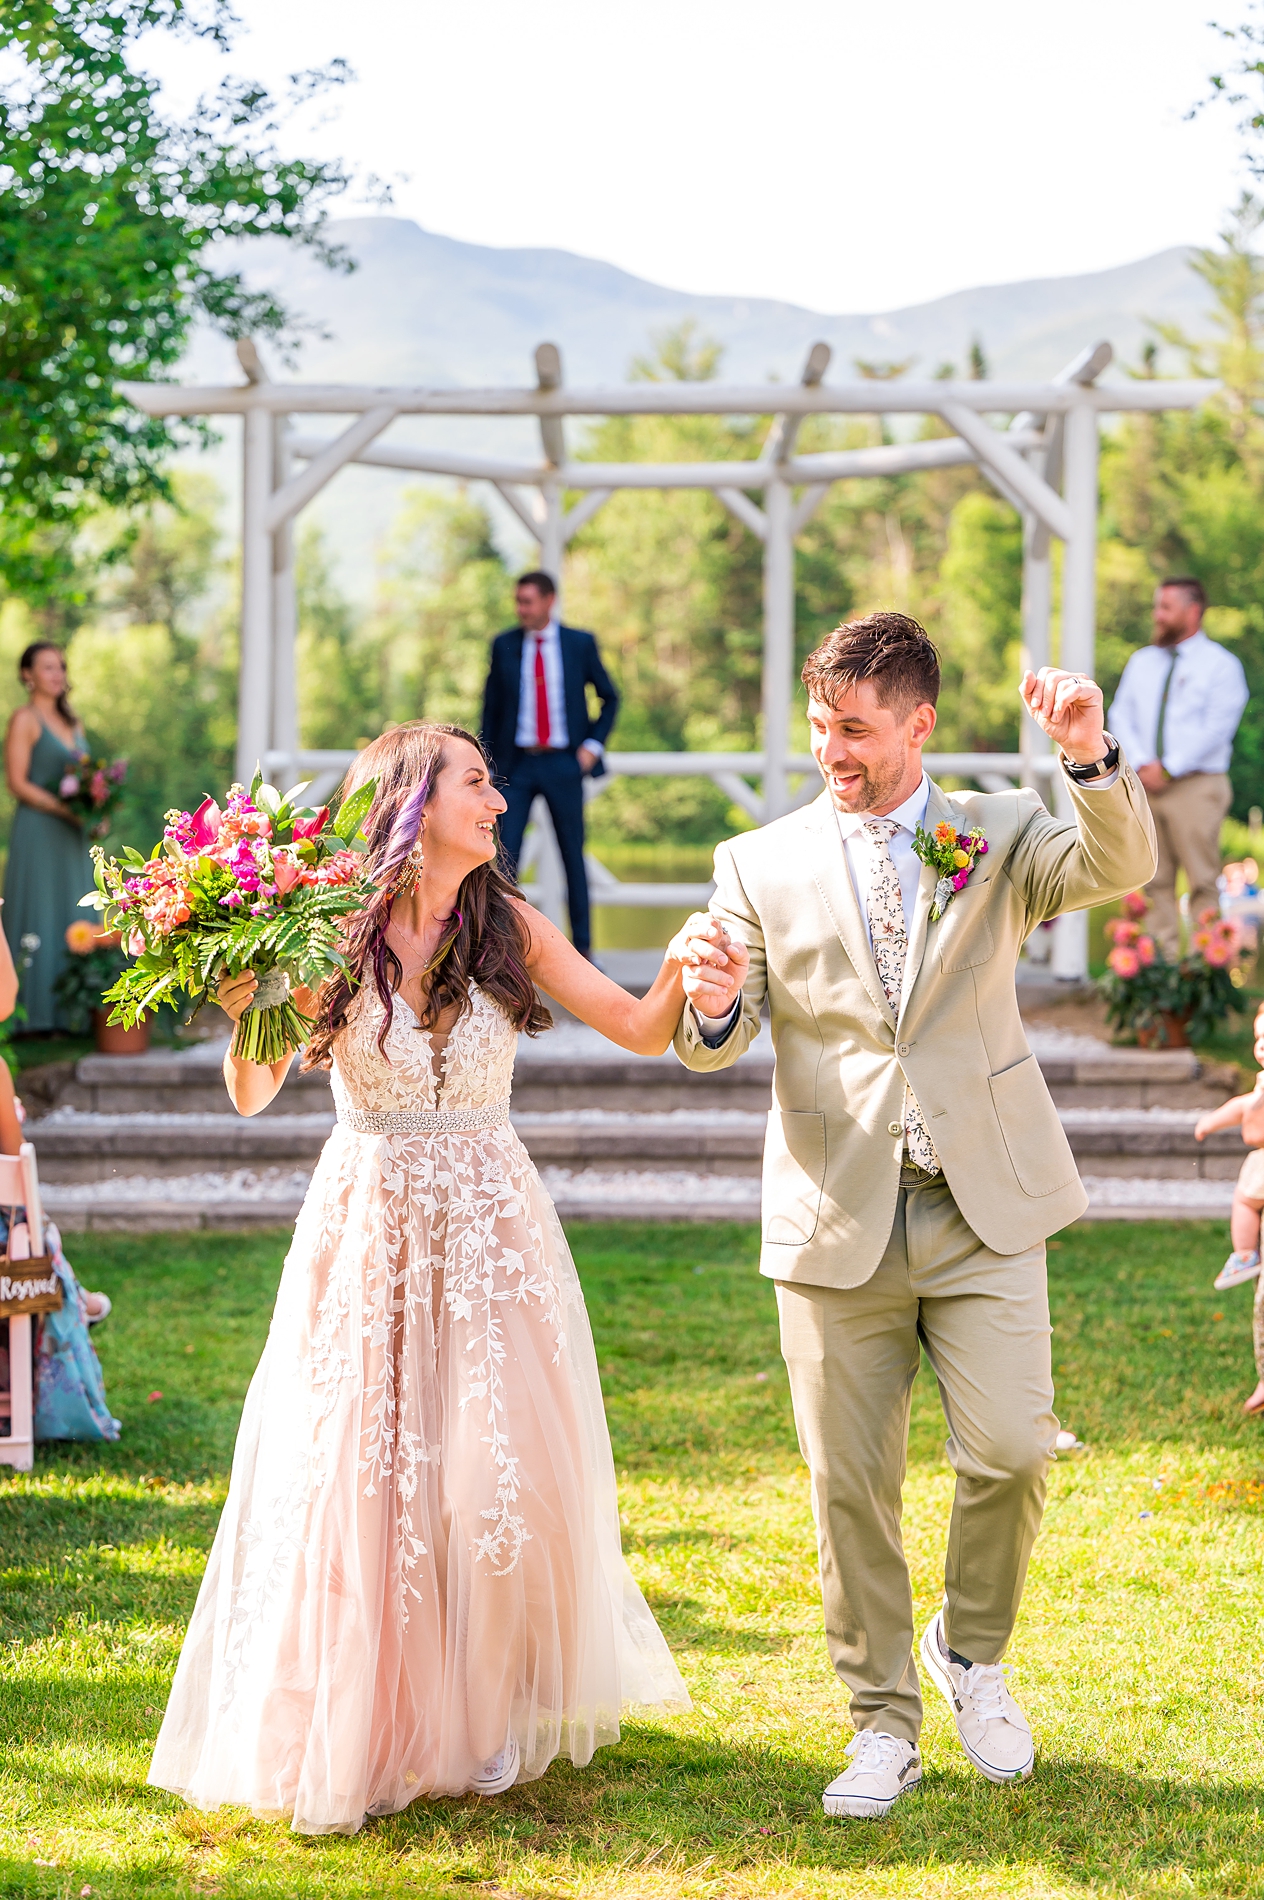 newlyweds walk together as husband and wife after bright + Colorful summer wedding ceremony